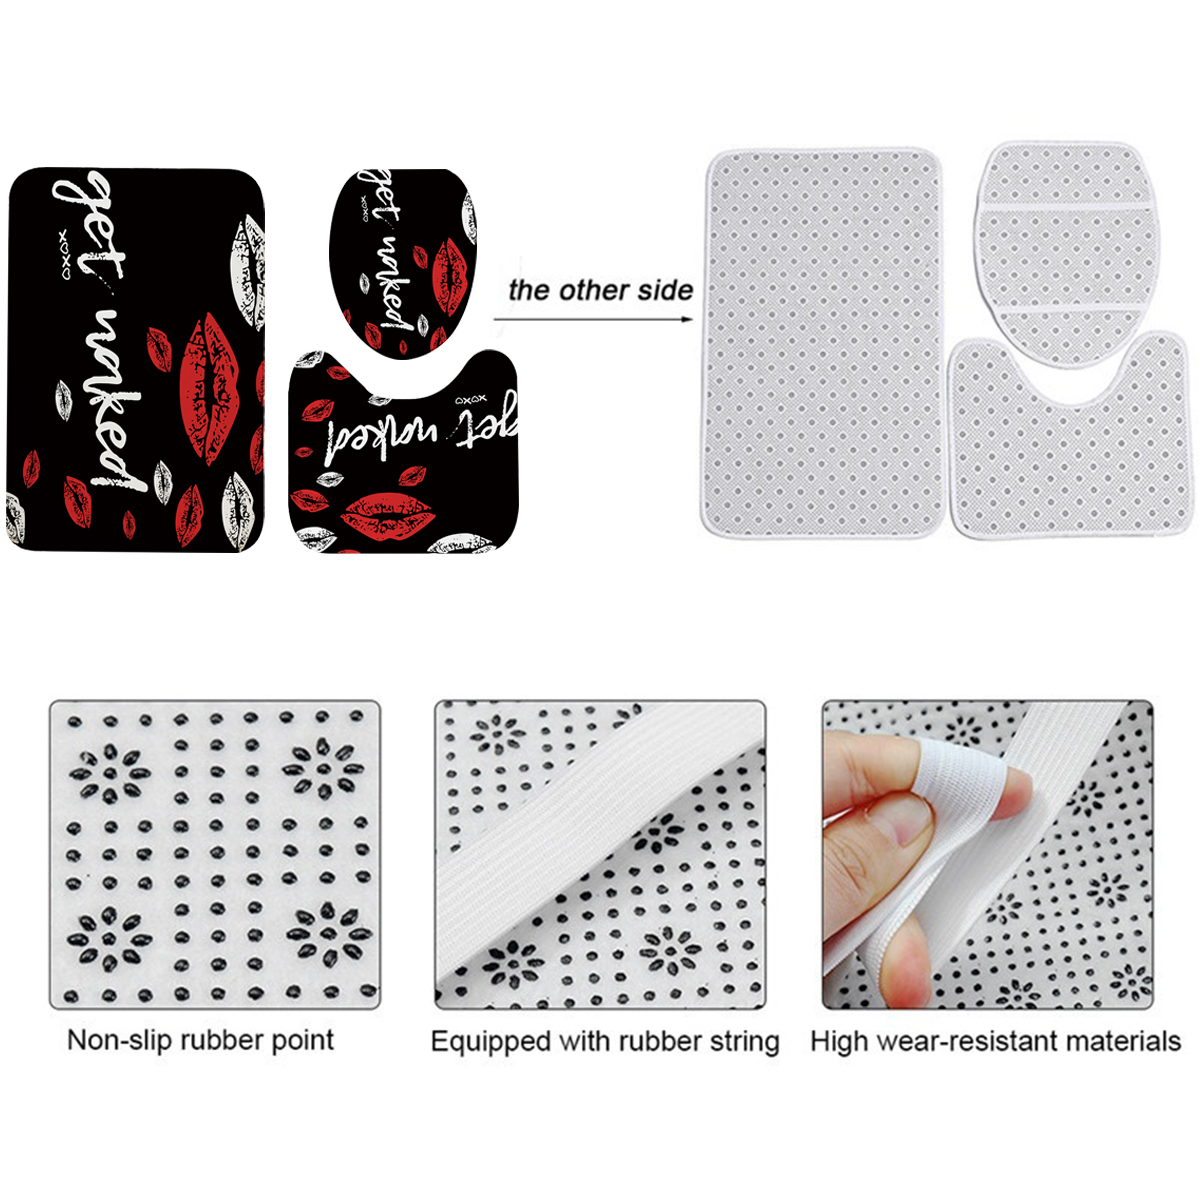 Red-Funny-Mouth-Bathroom-Shower-Curtian-Set-Waterproof-Toilet-Lid-Cover-Pedestal-Rug-Non-slip-Bath-M-1887836-10